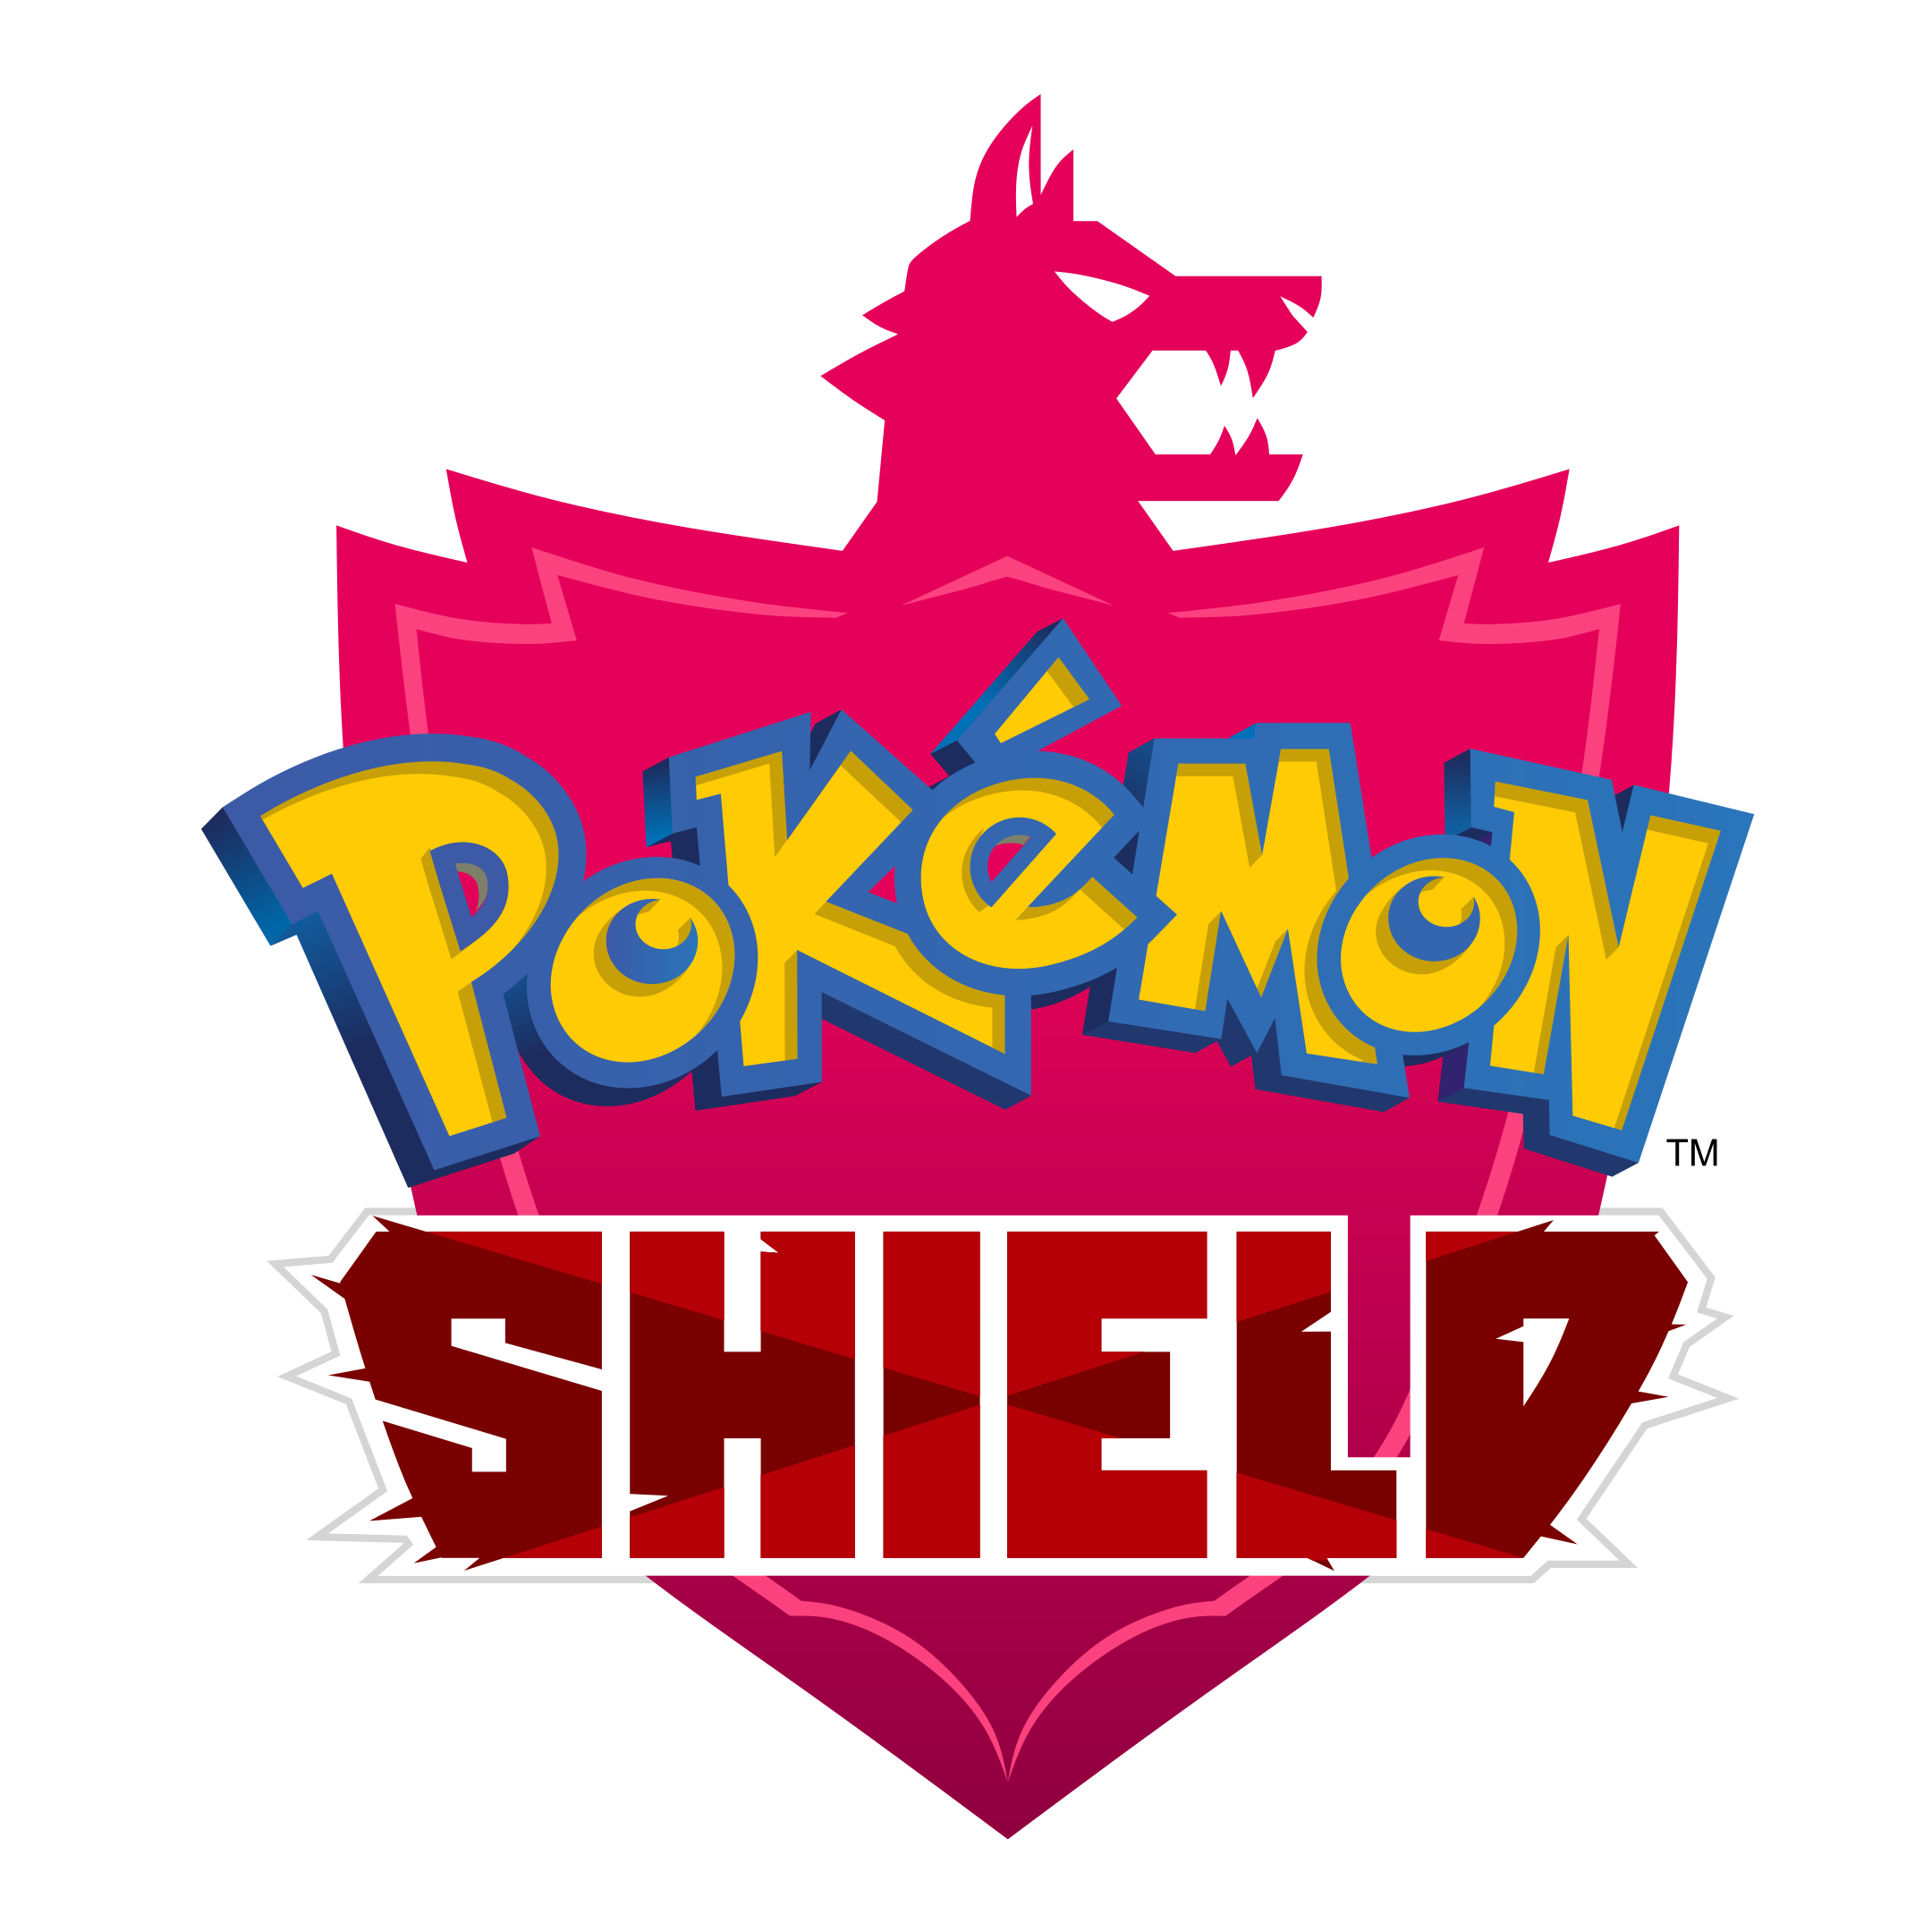 And Images Pokemon Shield Sword PNG Image